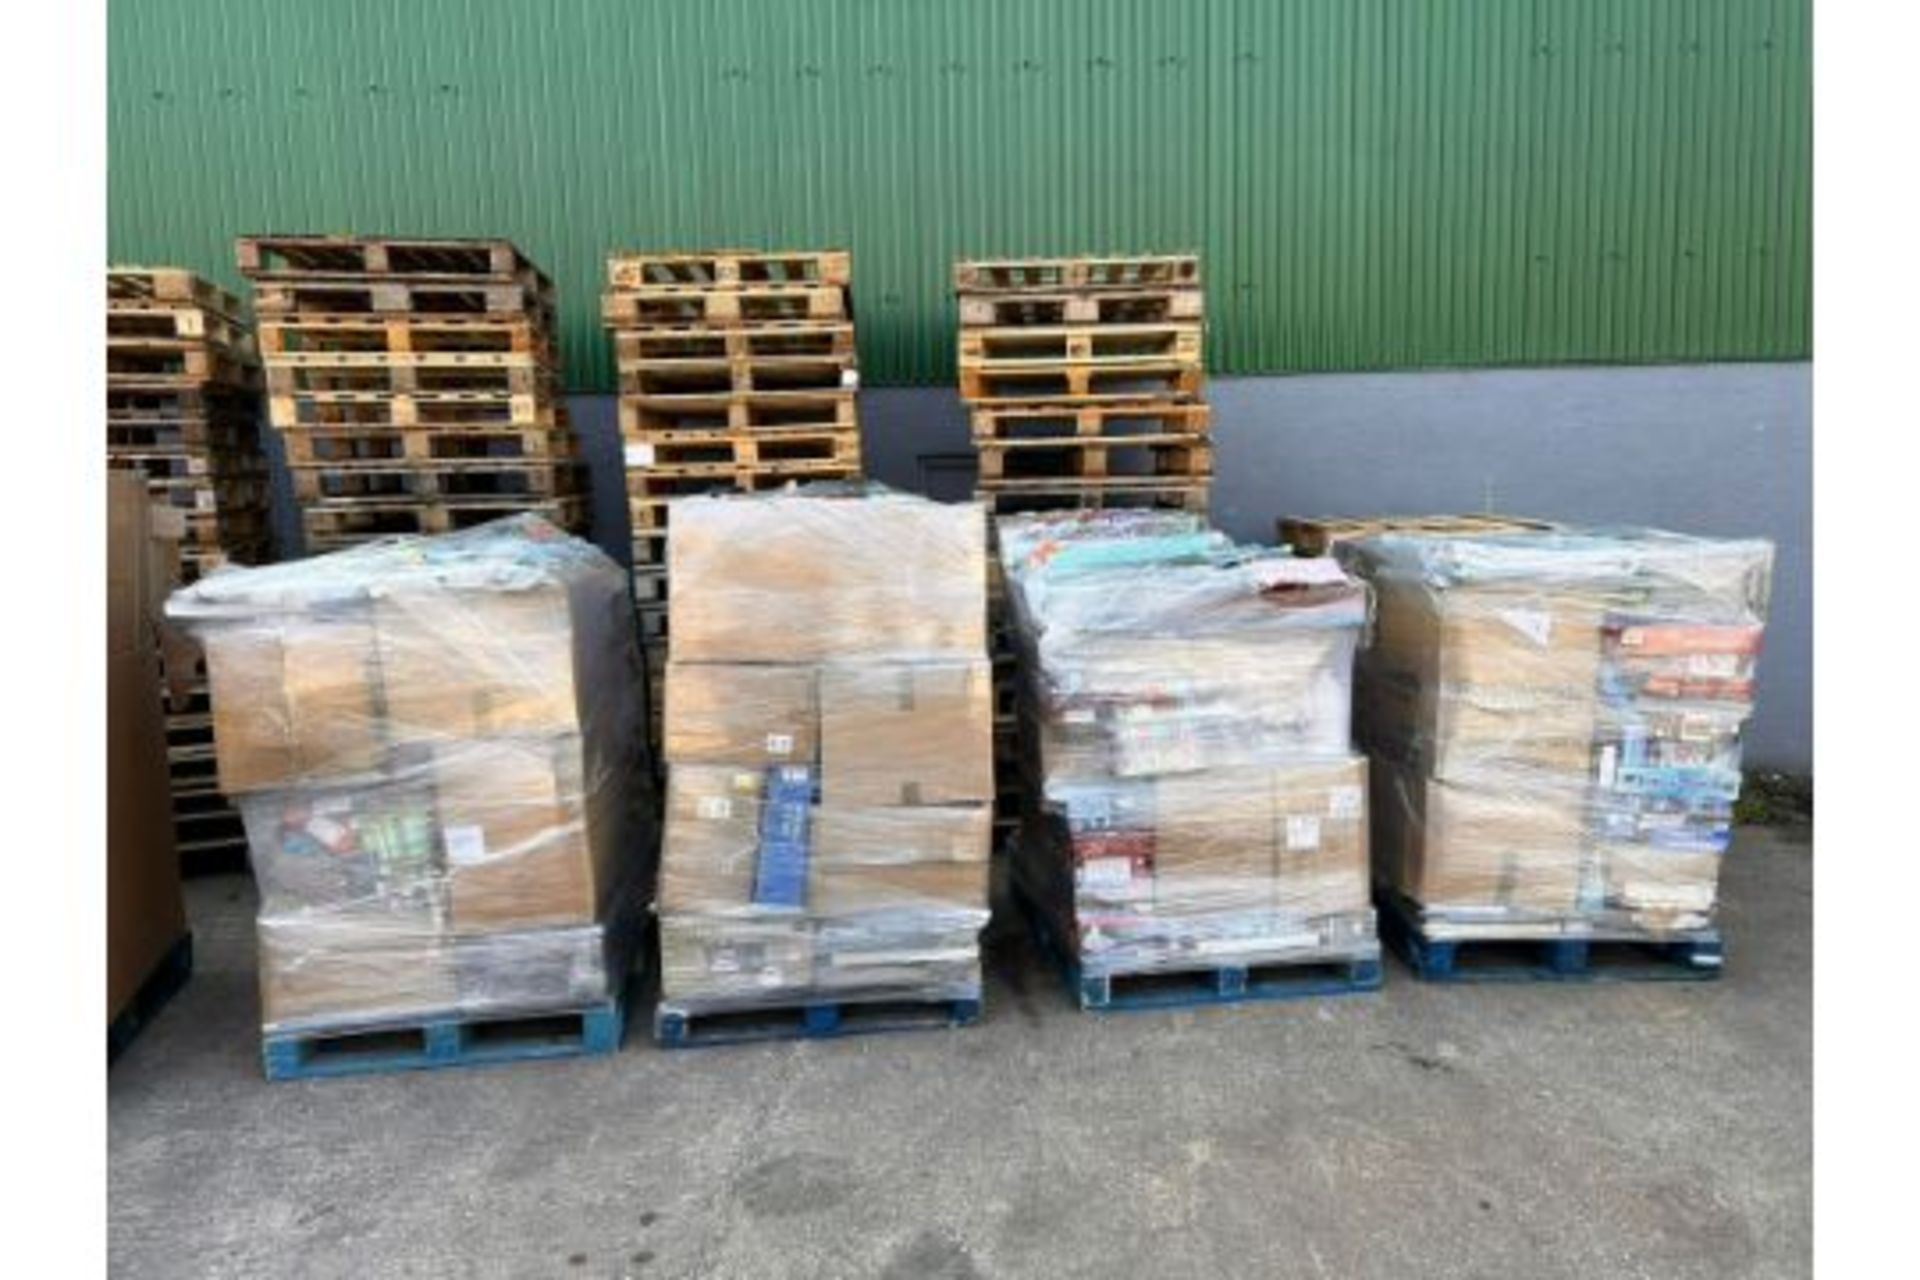 Large Pallet of Unchecked Supermarket Stock. Huge variety of items which may include: tools, toys, - Image 6 of 17